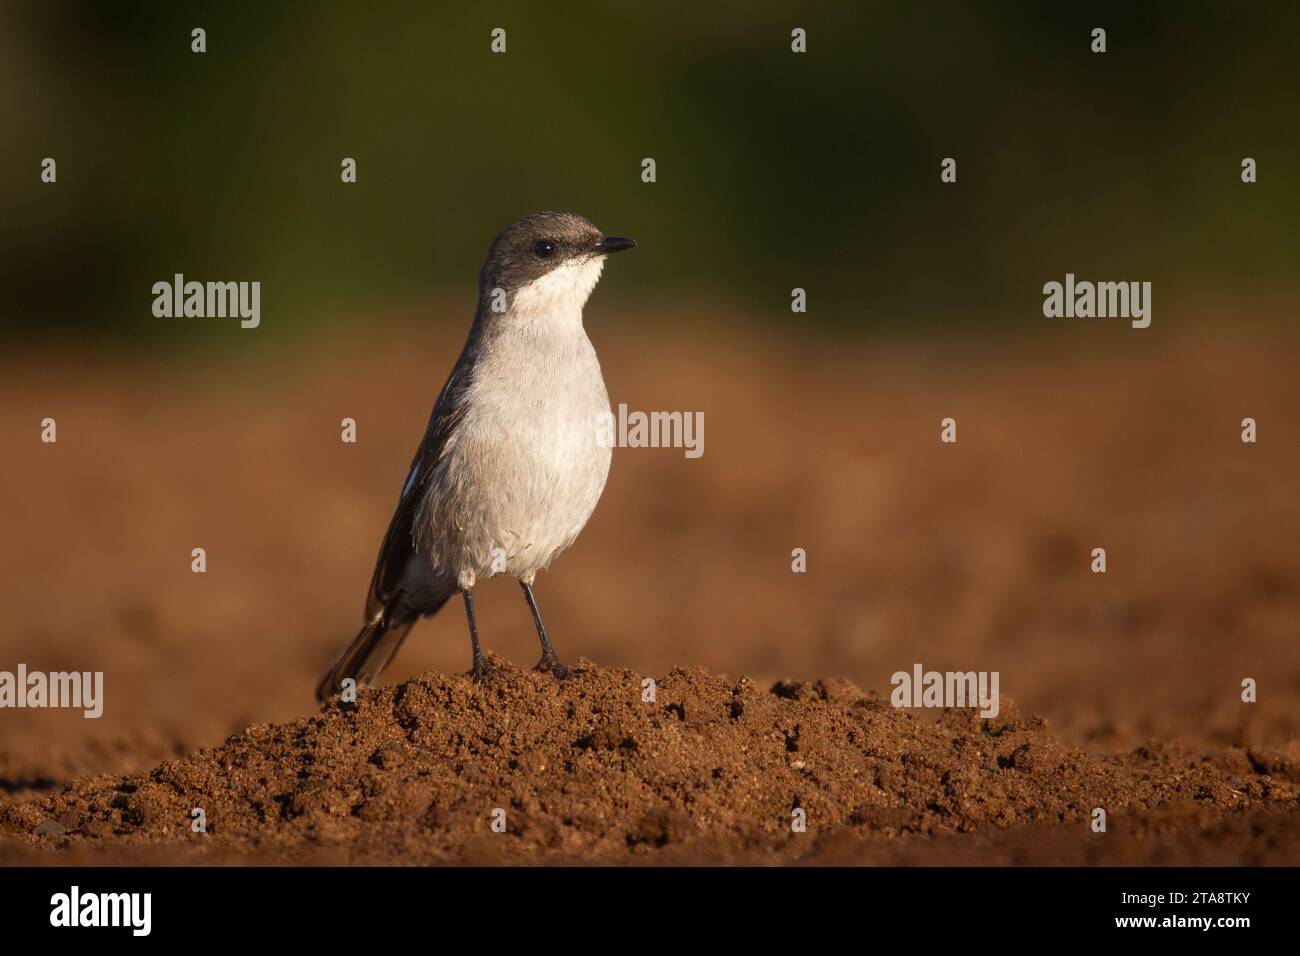 A solitary close up of a Fiscal flycatcher Sigelus silens in profile on the ground in a game reserve in South Africa Stock Photo